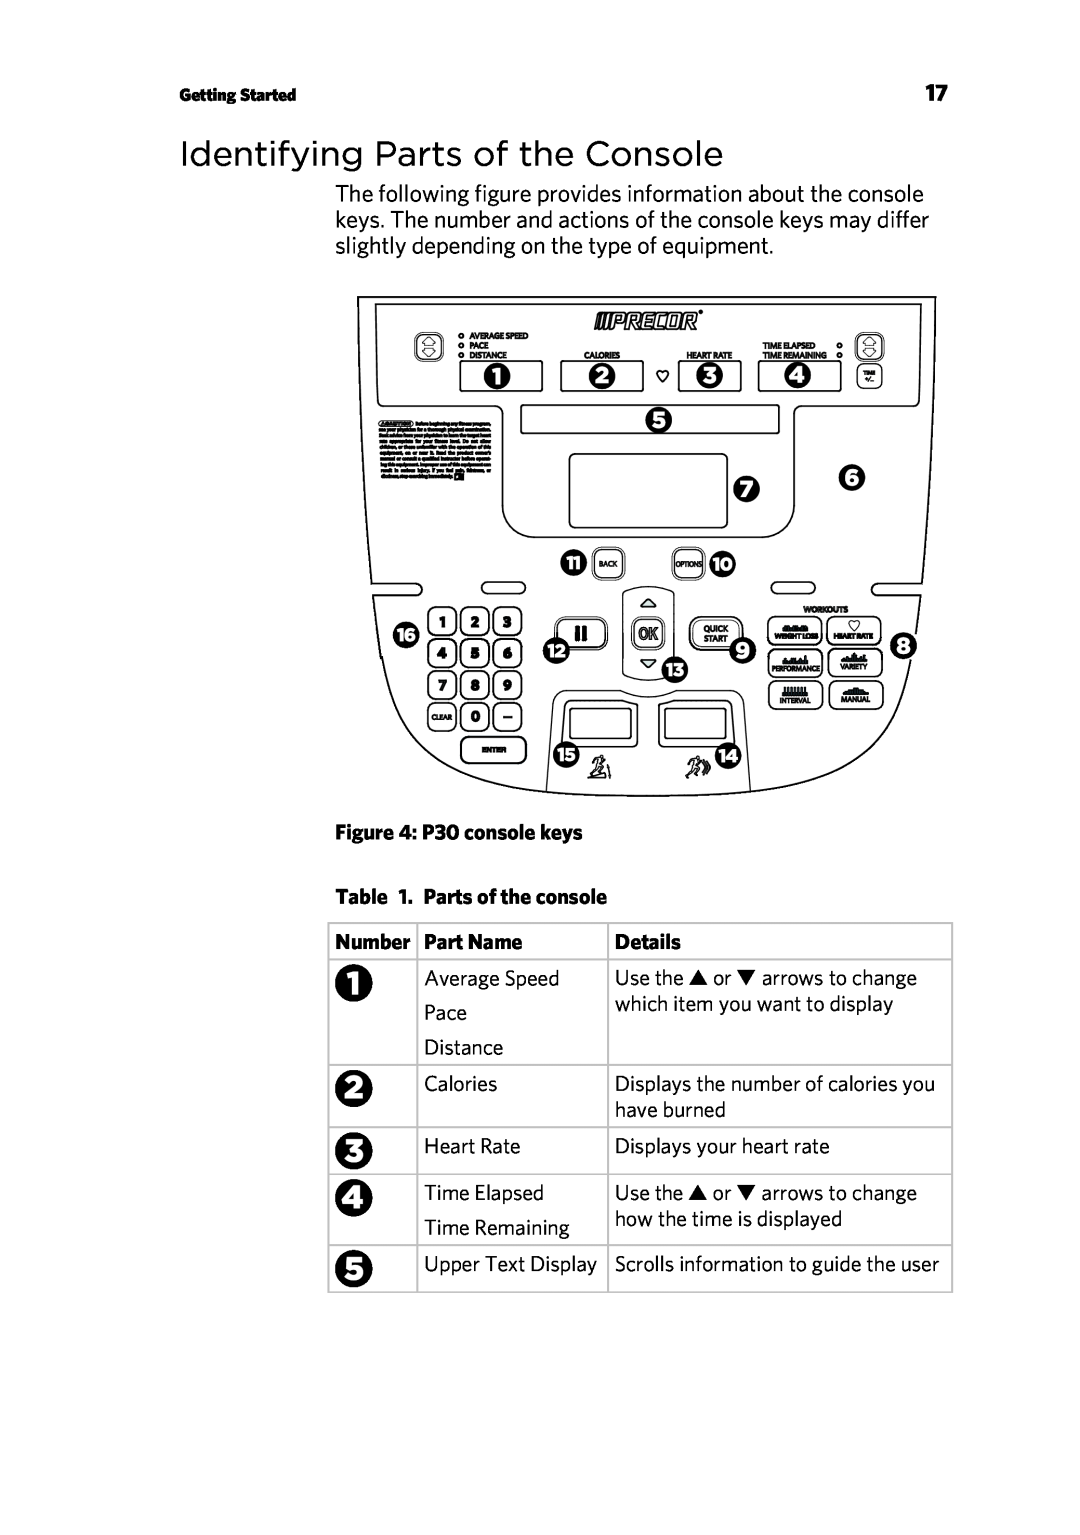 Precor manual Identifying Parts of the Console, P30 console keys . Parts of the console, Number Part Name, Details 